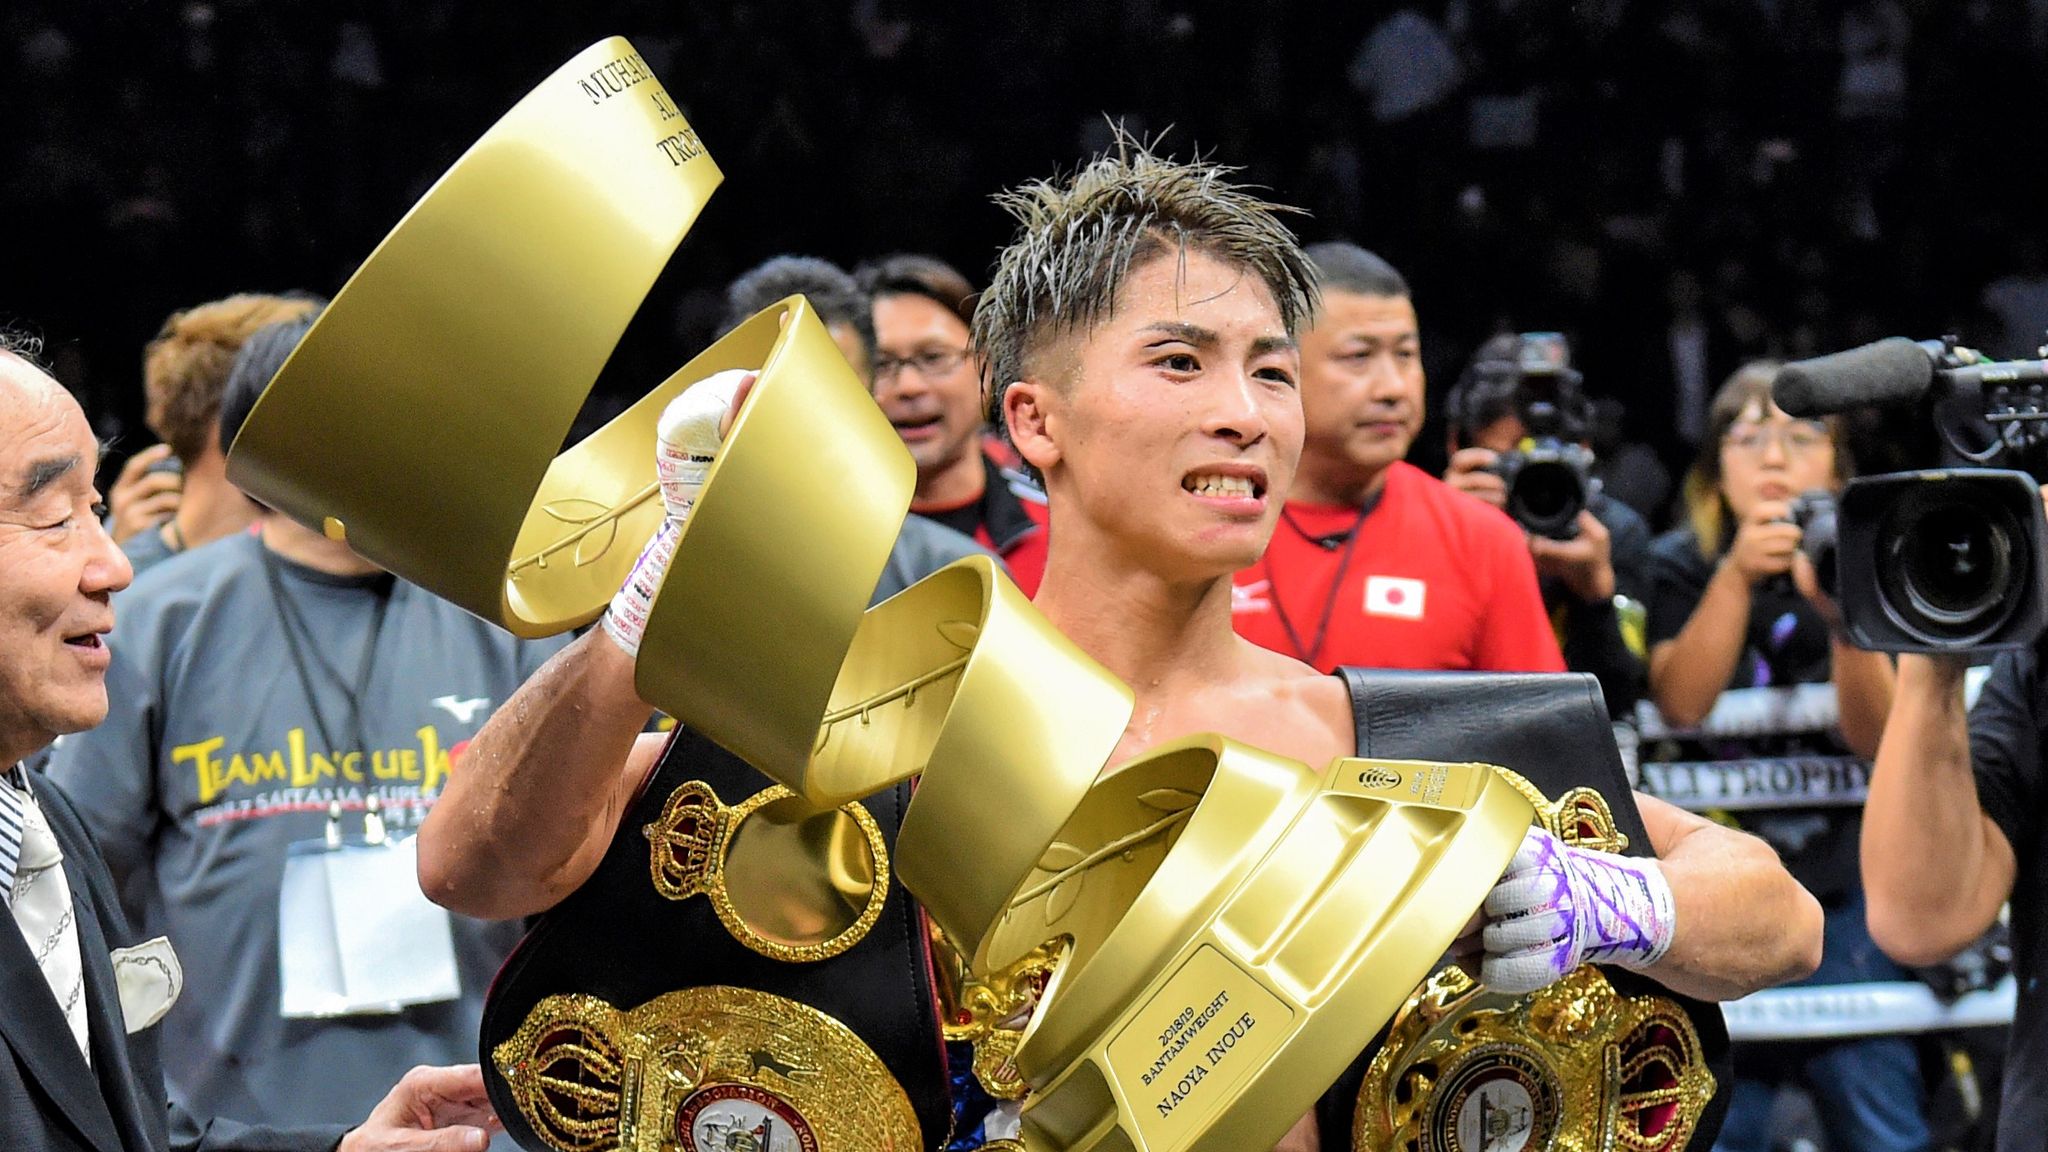 WBSS Naoya Inoue defeats Nonito Donaire on points to win World Boxing Super Series final Boxing News Sky Sports